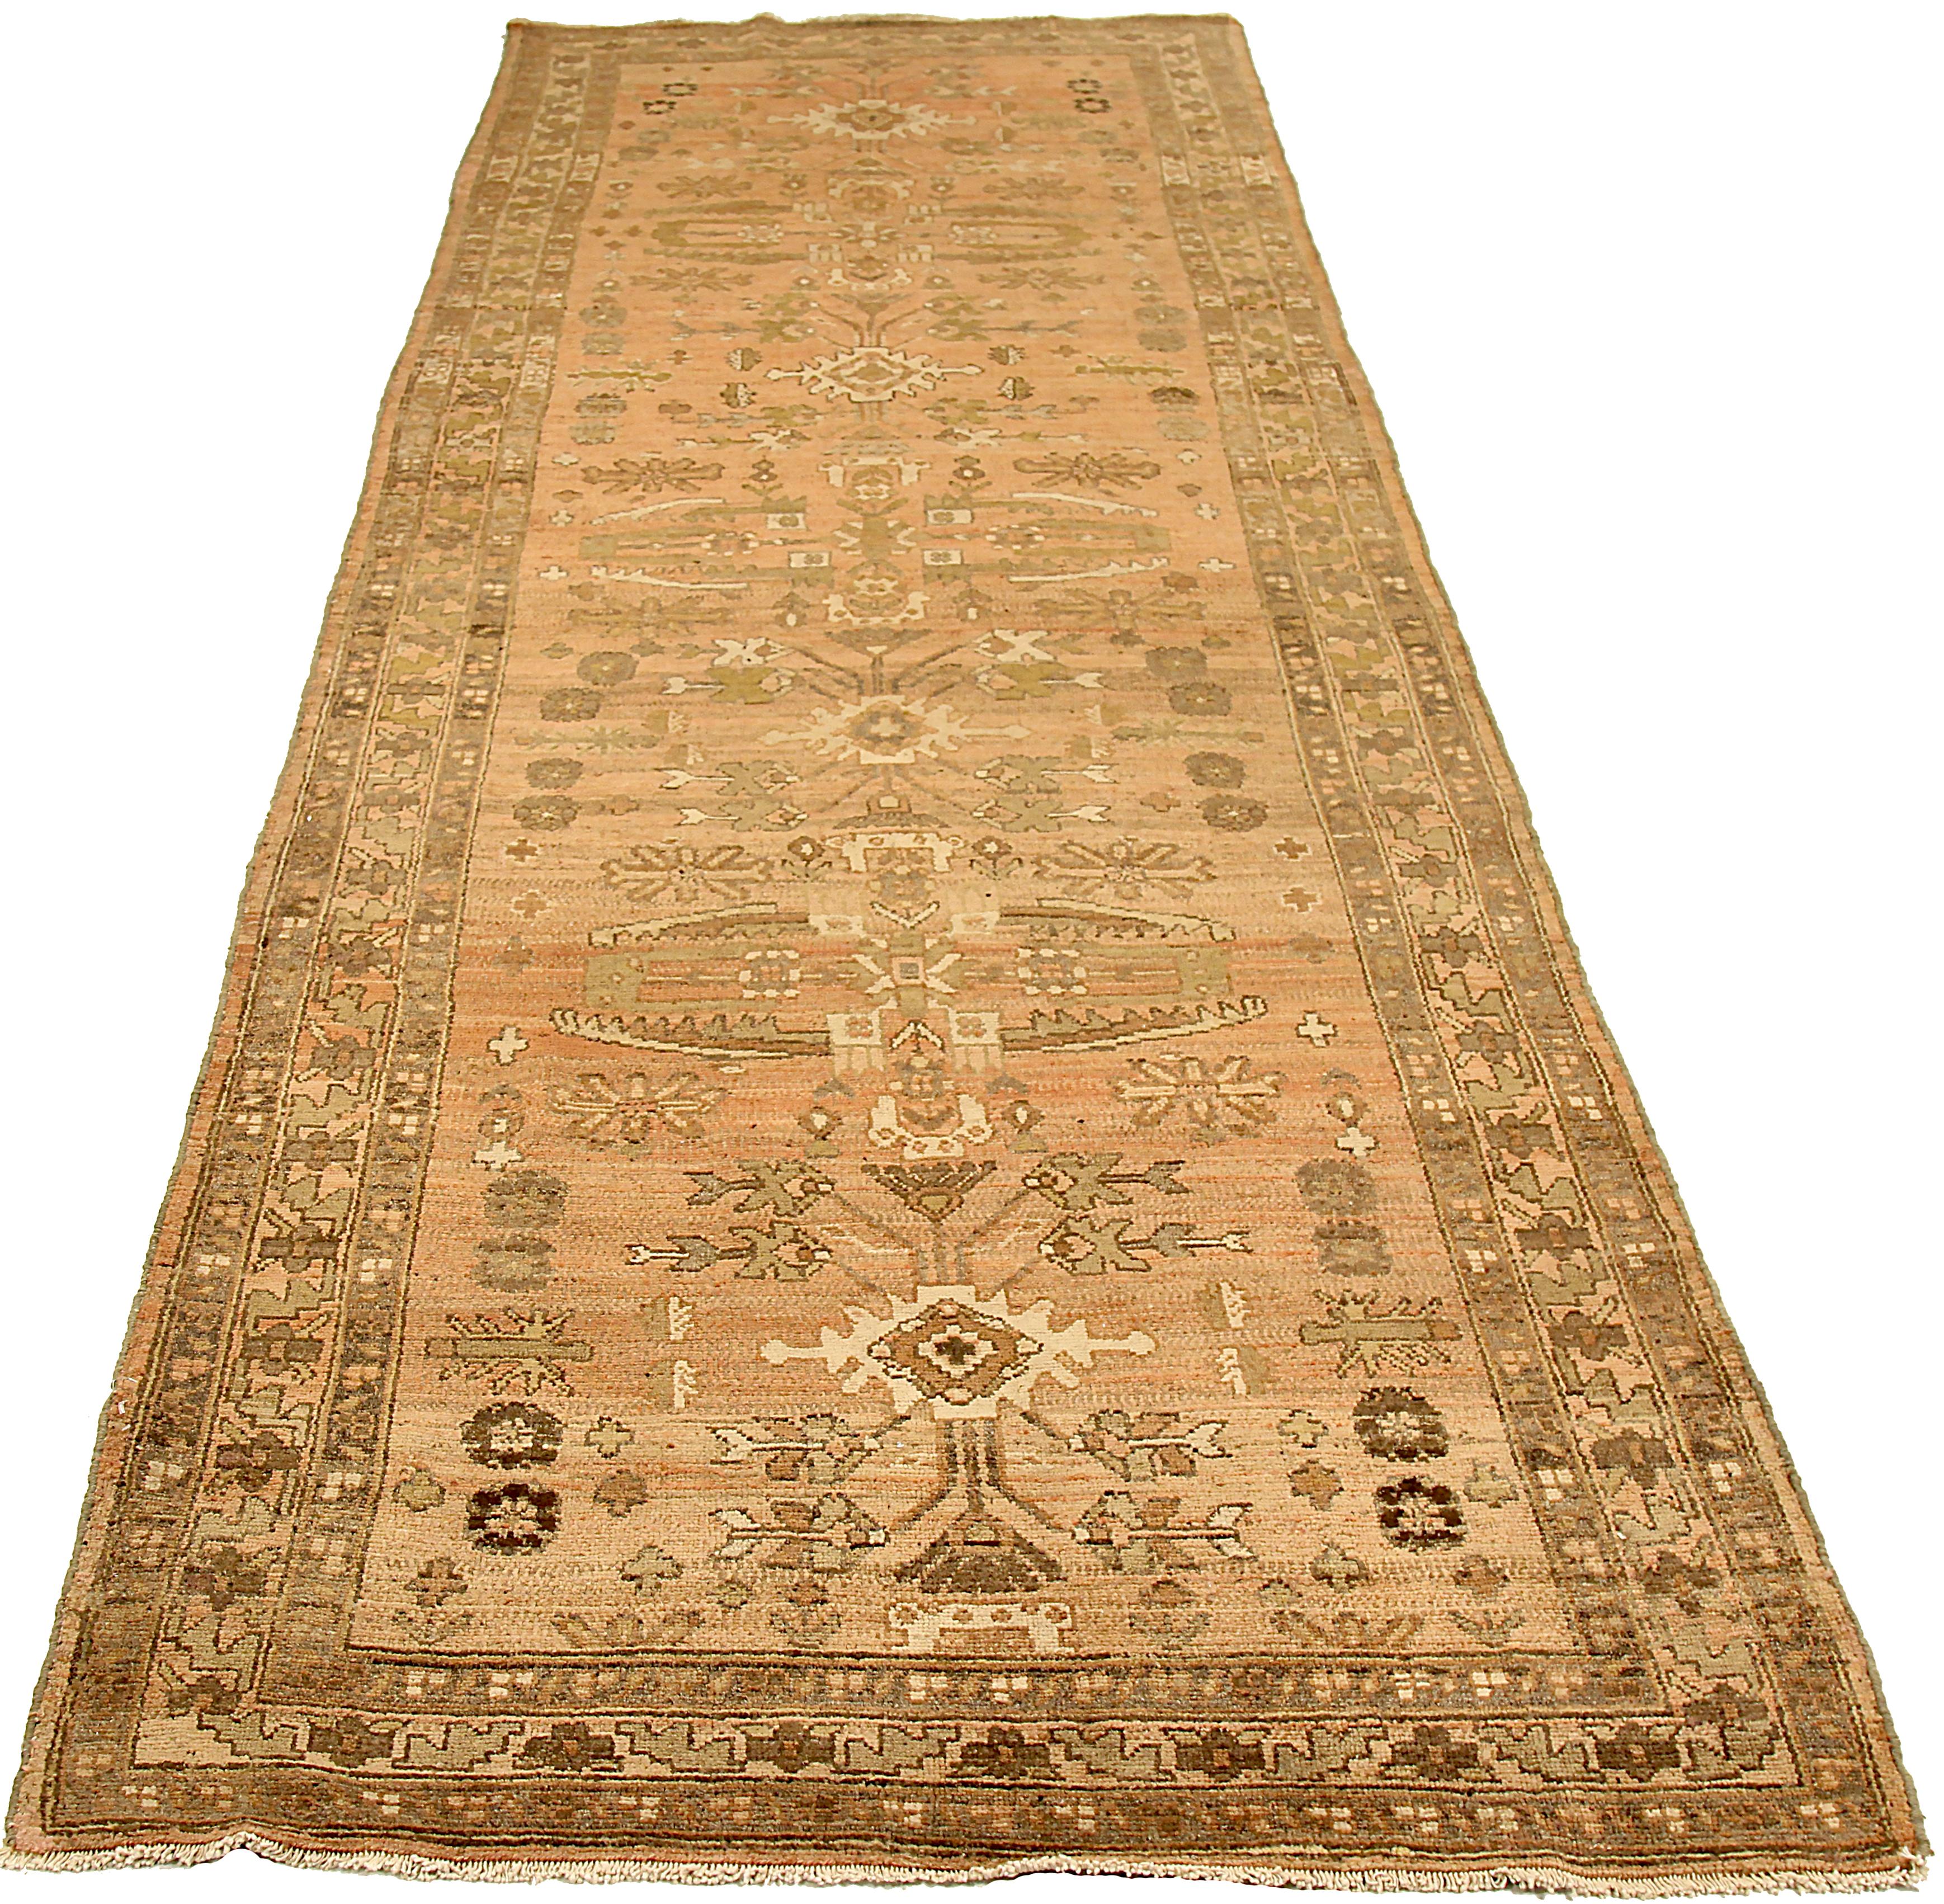 Antique Persian runner rug handwoven from the finest sheep’s wool and colored with all-natural vegetable dyes that are safe for humans and pets. It’s a traditional Koliai design featuring tribal and floral details on an ivory field. It’s a beautiful